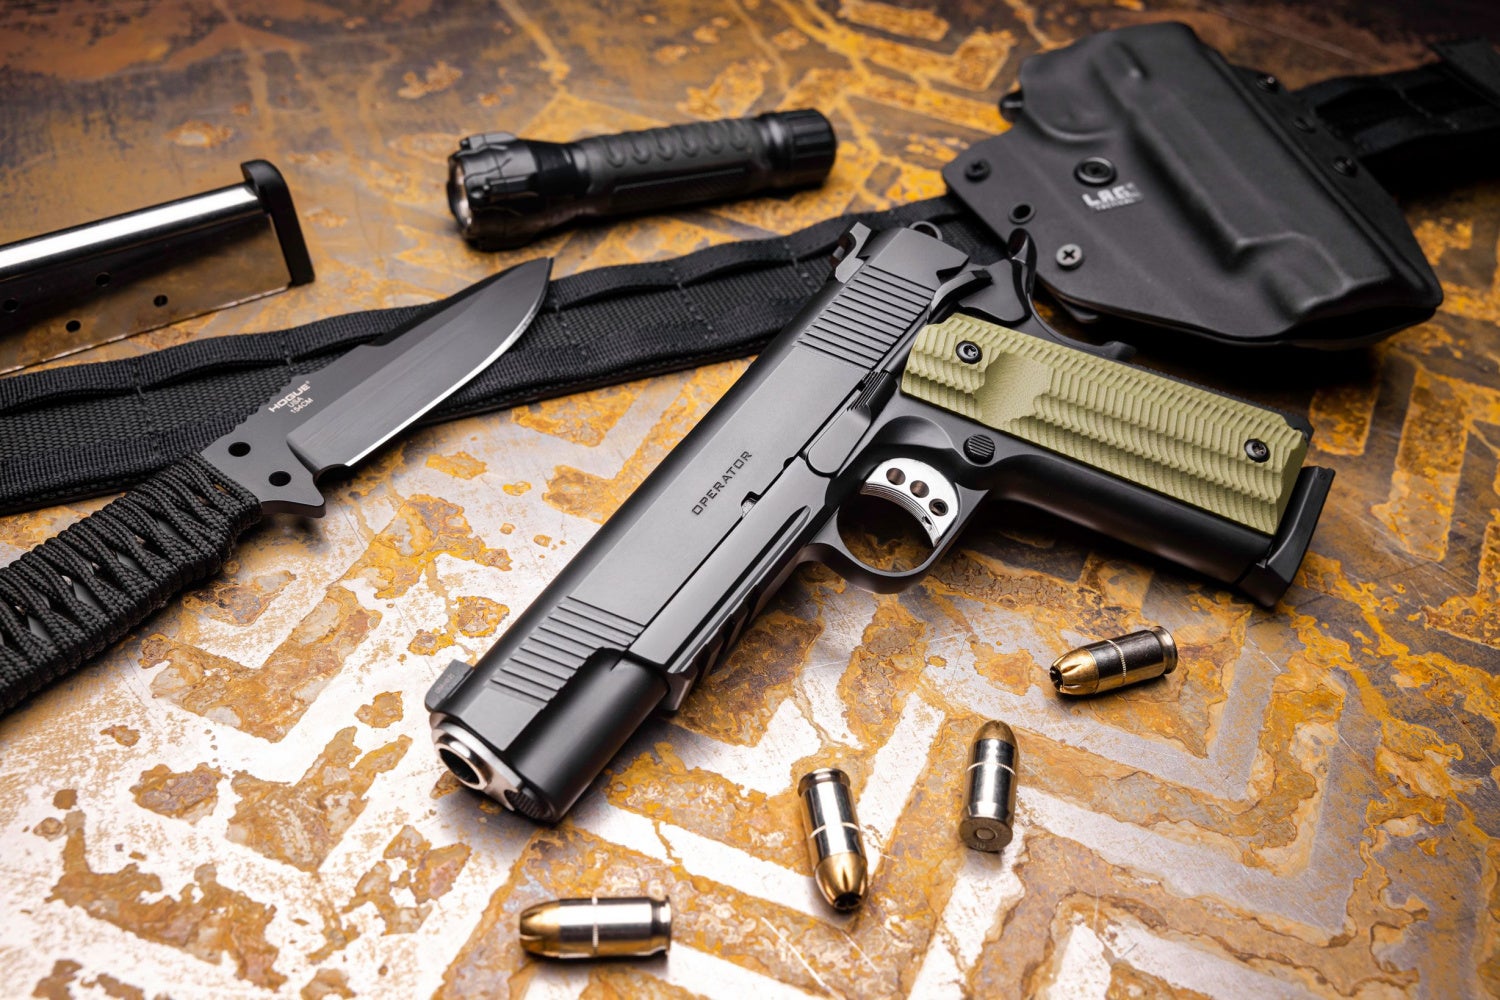 Springfield Armory Introduces Their New 1911 Operator Pistol